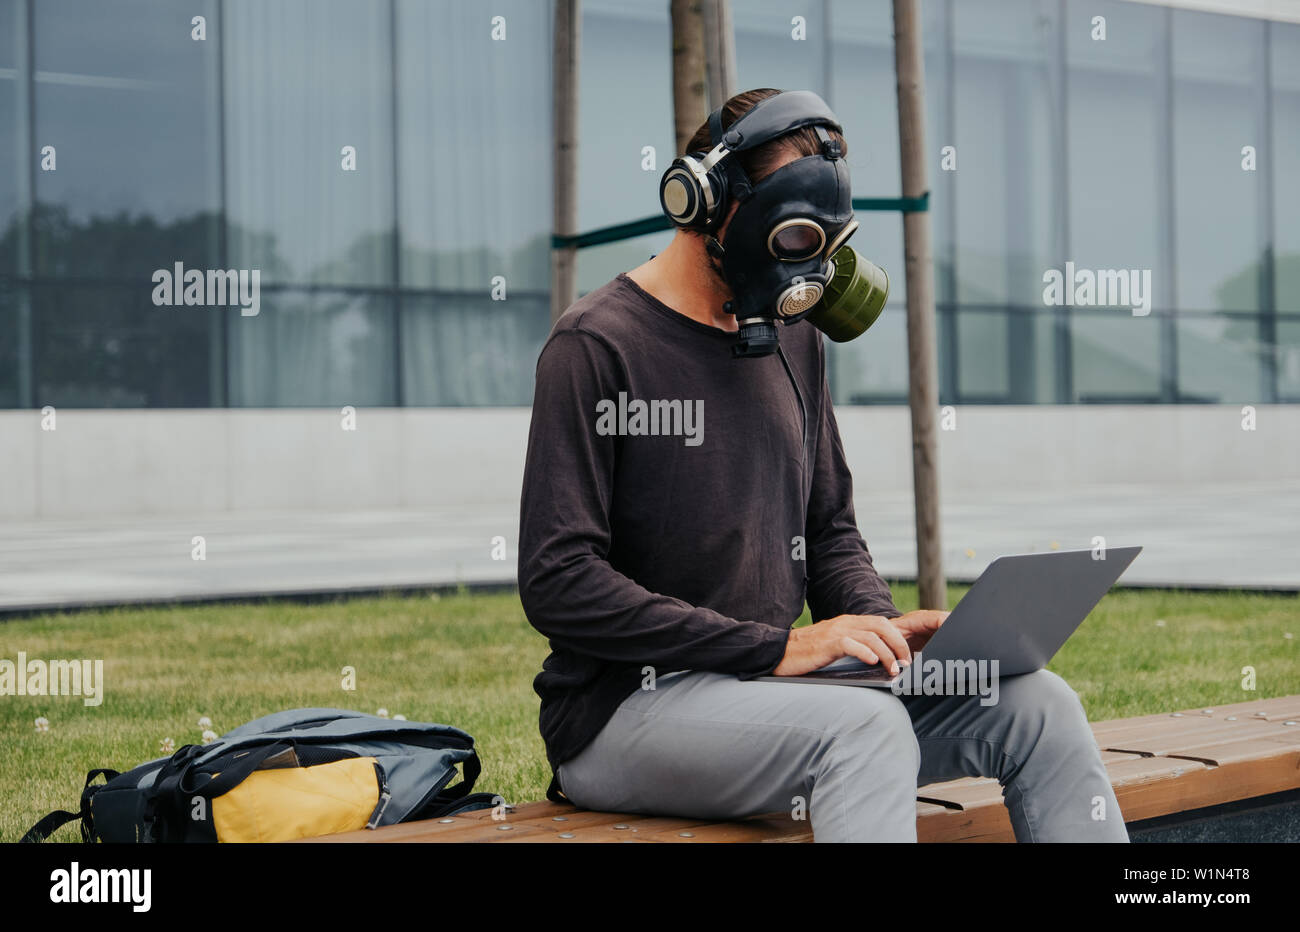 A city man in a gas mask works and listens to music against the background of a building and trees in a vacuum without people Stock Photo